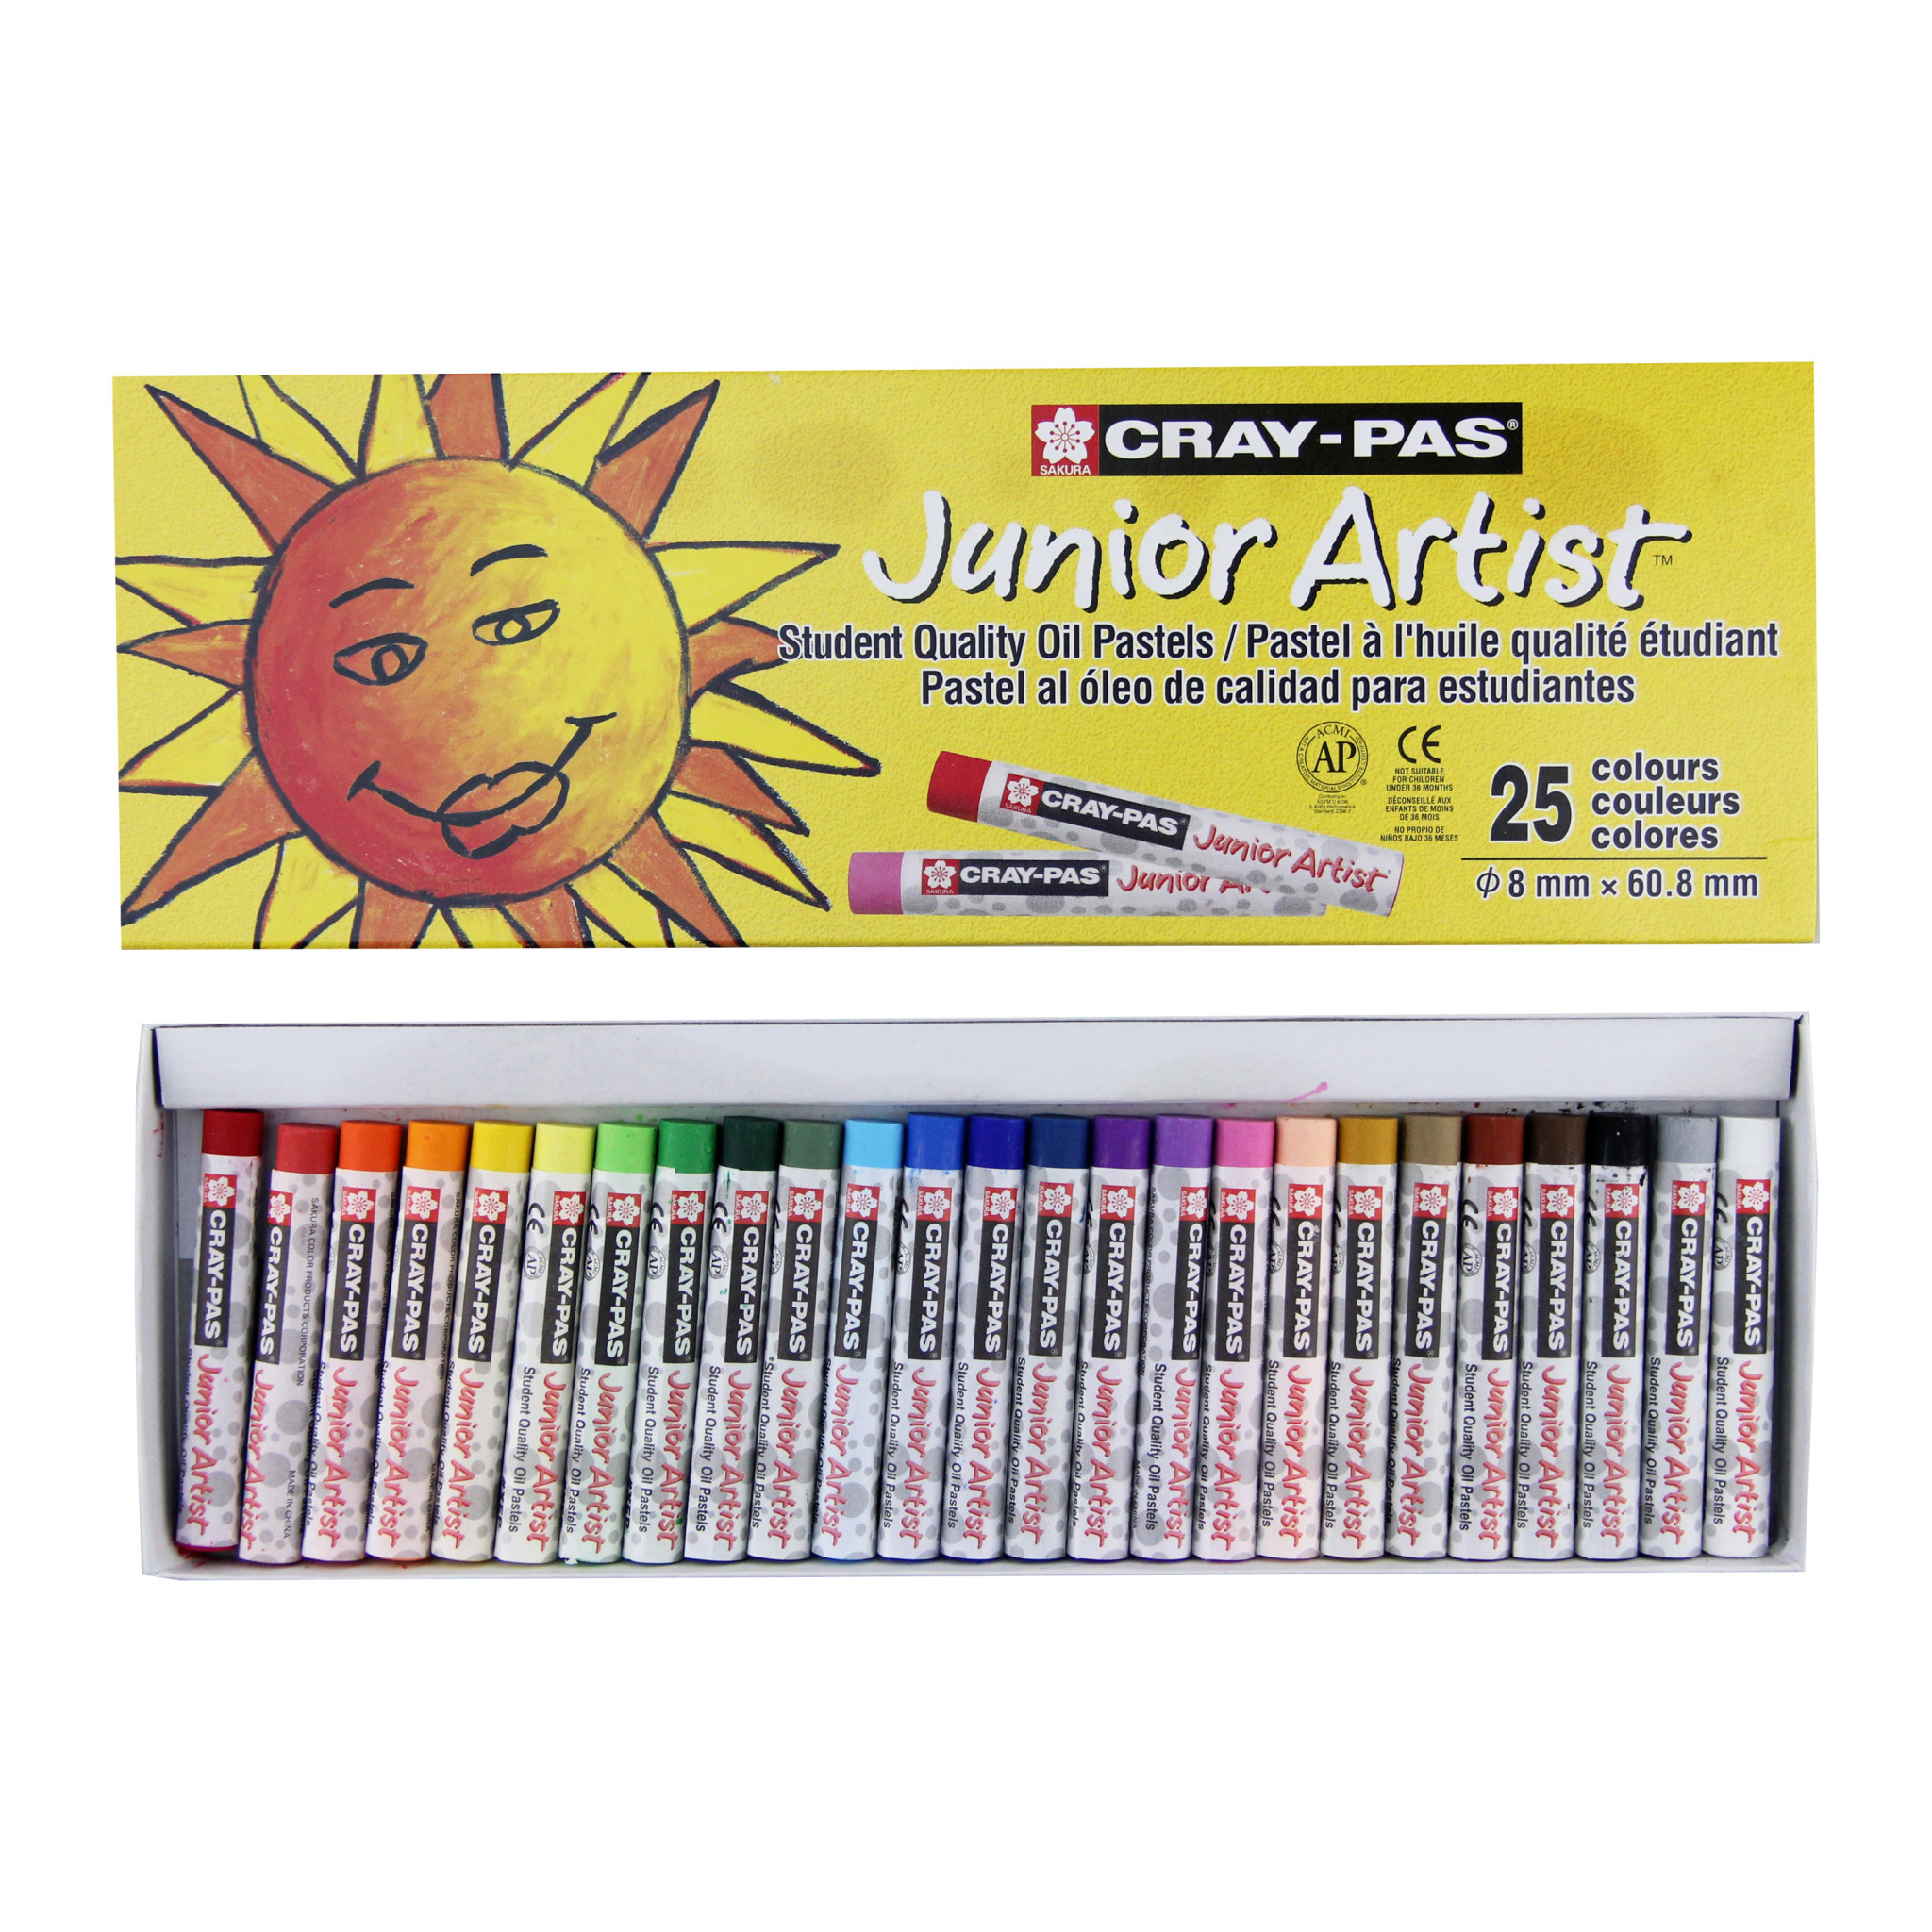 Soft Texture Cray-PAS Set Contains Rich Colors Art Oil Pastels for Artists  of All Ages - China Cray-PAS, Oil Pastels Set